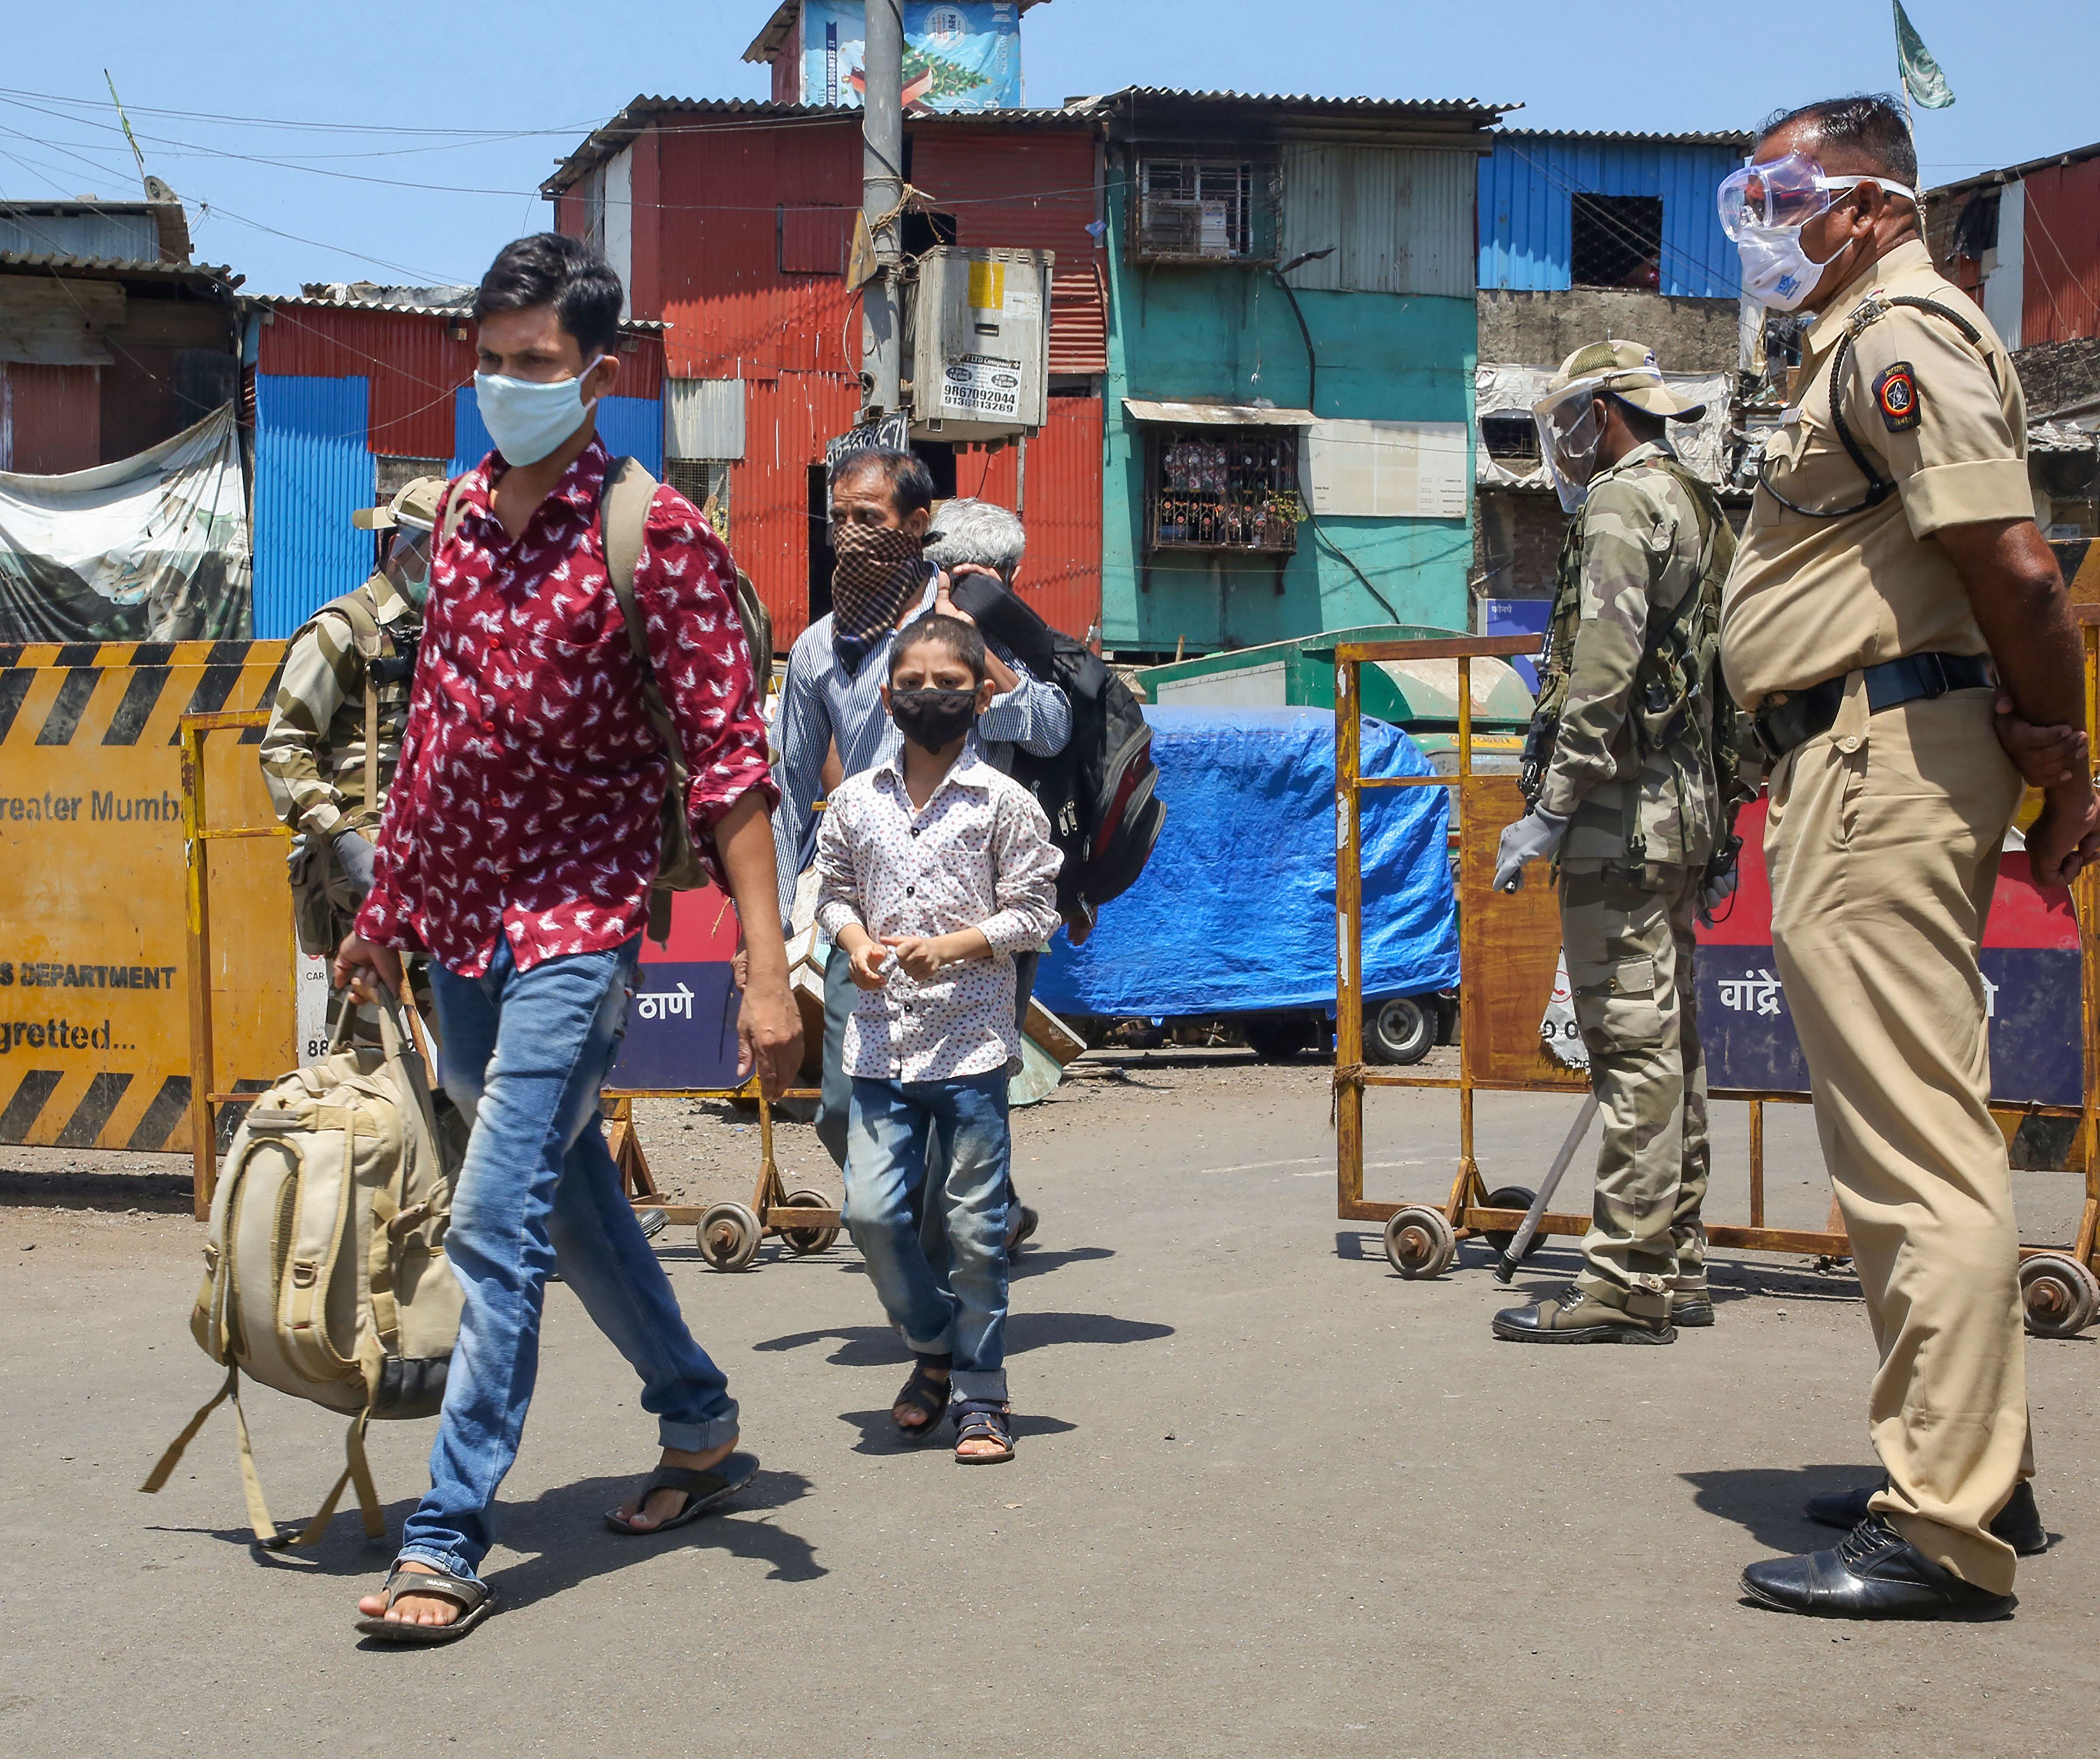 Security personnel stand guard as commuters walk past them in Mumbai